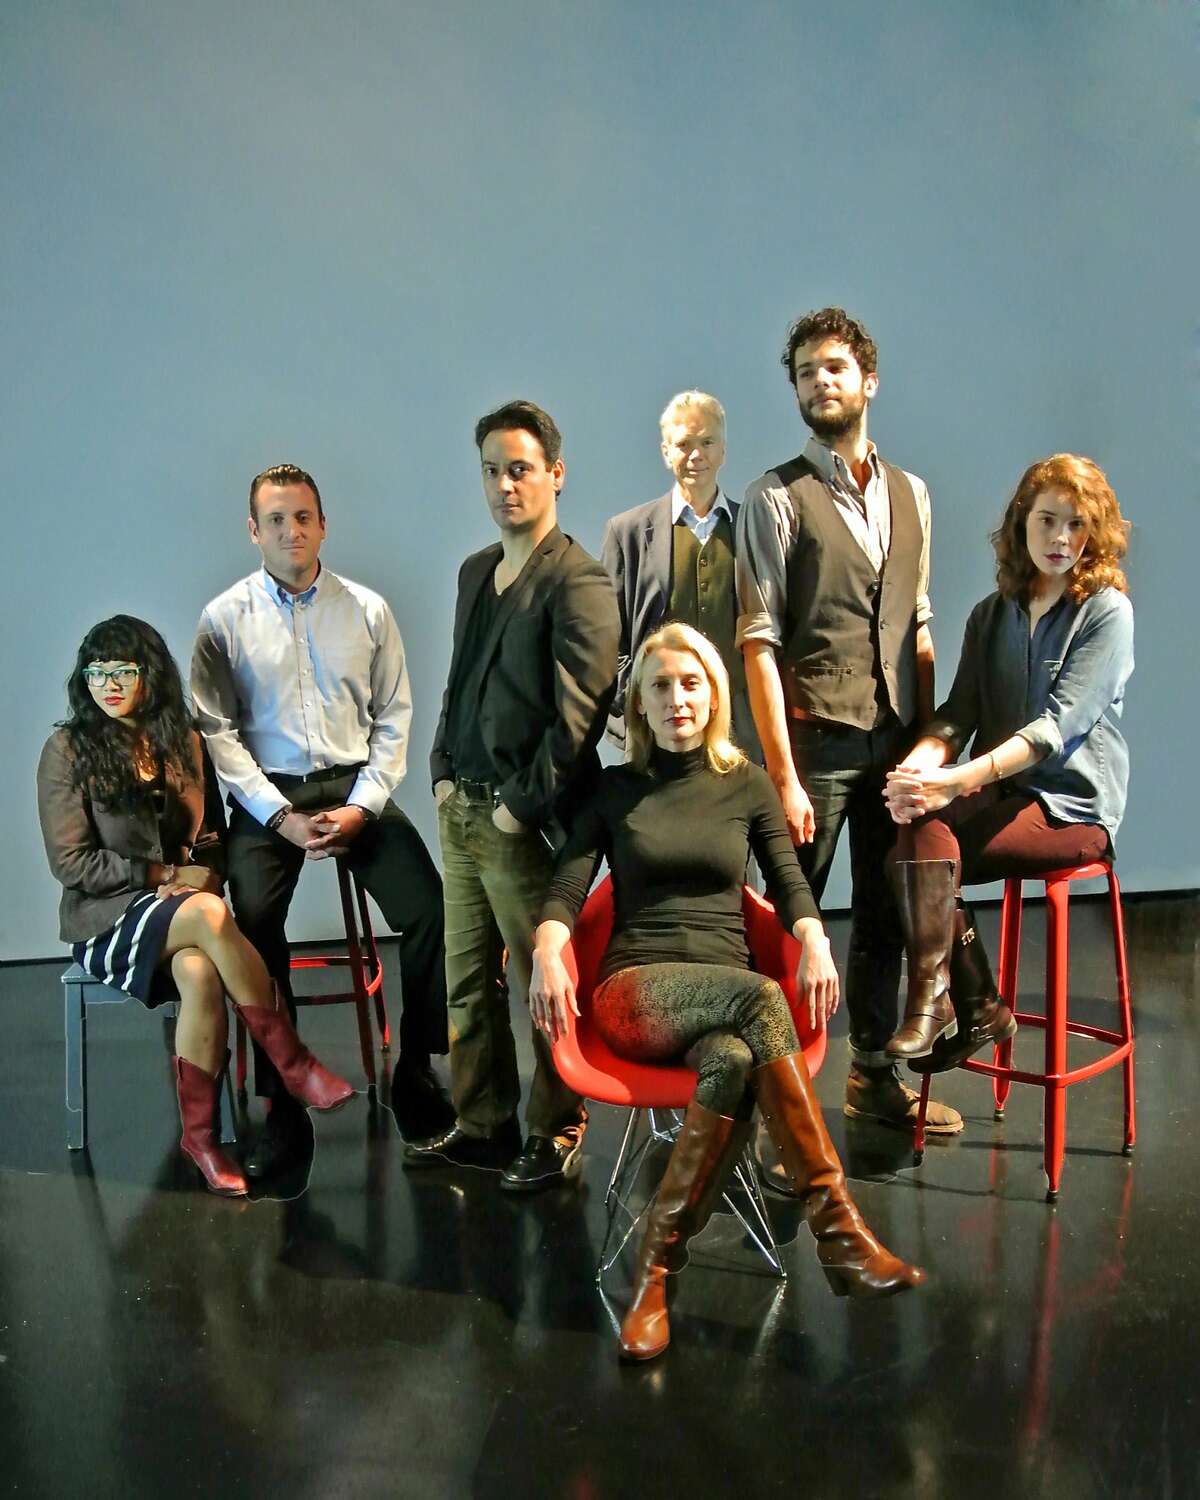 The cast of Aaron Posner's "Stupid F##king Bird" at San Francisco Playhouse includes (from left) El Beh, Joseph Estlack, Johnny Moreno, Carrie Paff (seated), Charles Shaw Robinson, Adam Magill and Martha Brigham. The production, an adaptation of Chekhov's "The Seagull," continues through May 2. Photo by Lauren English and Fei Cai